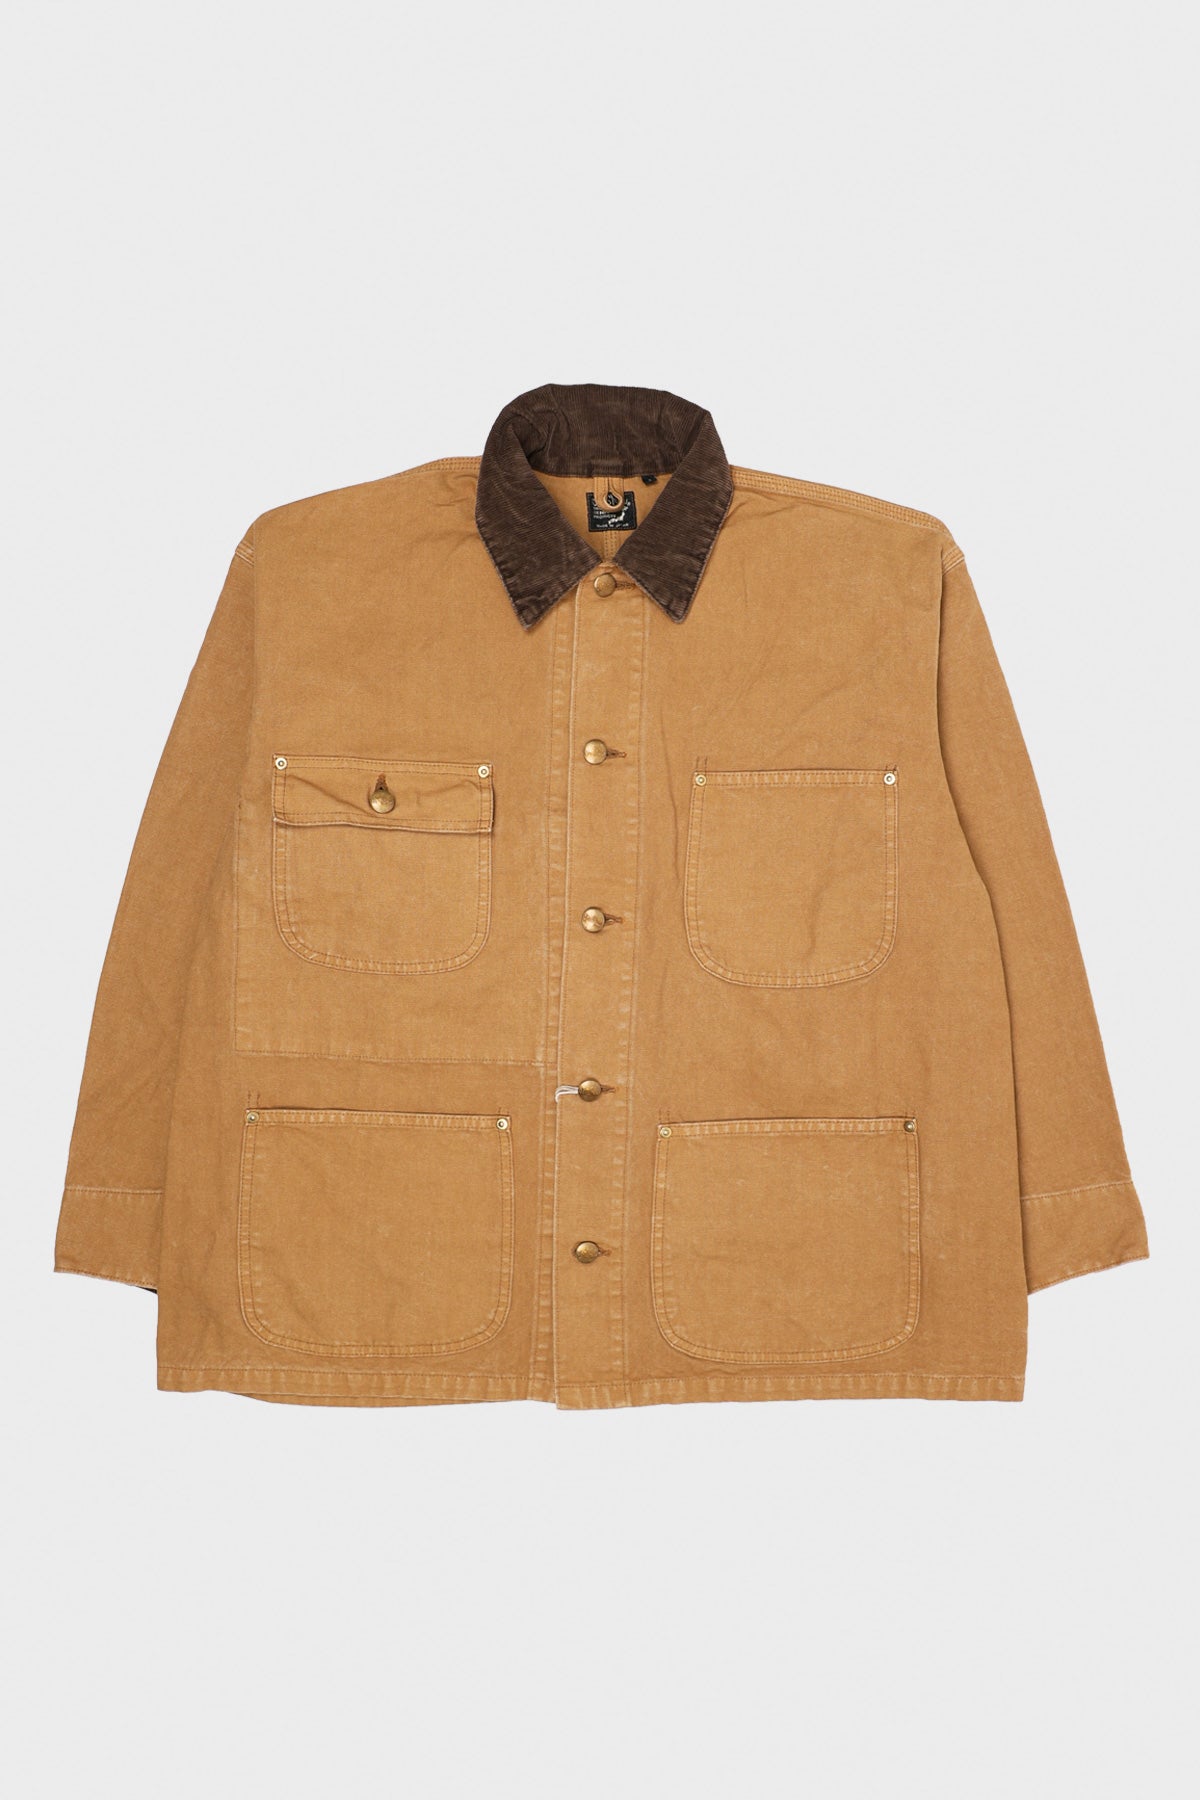 OrSlow Loose Fit Oxford Coverall | Brown | Canoe Club